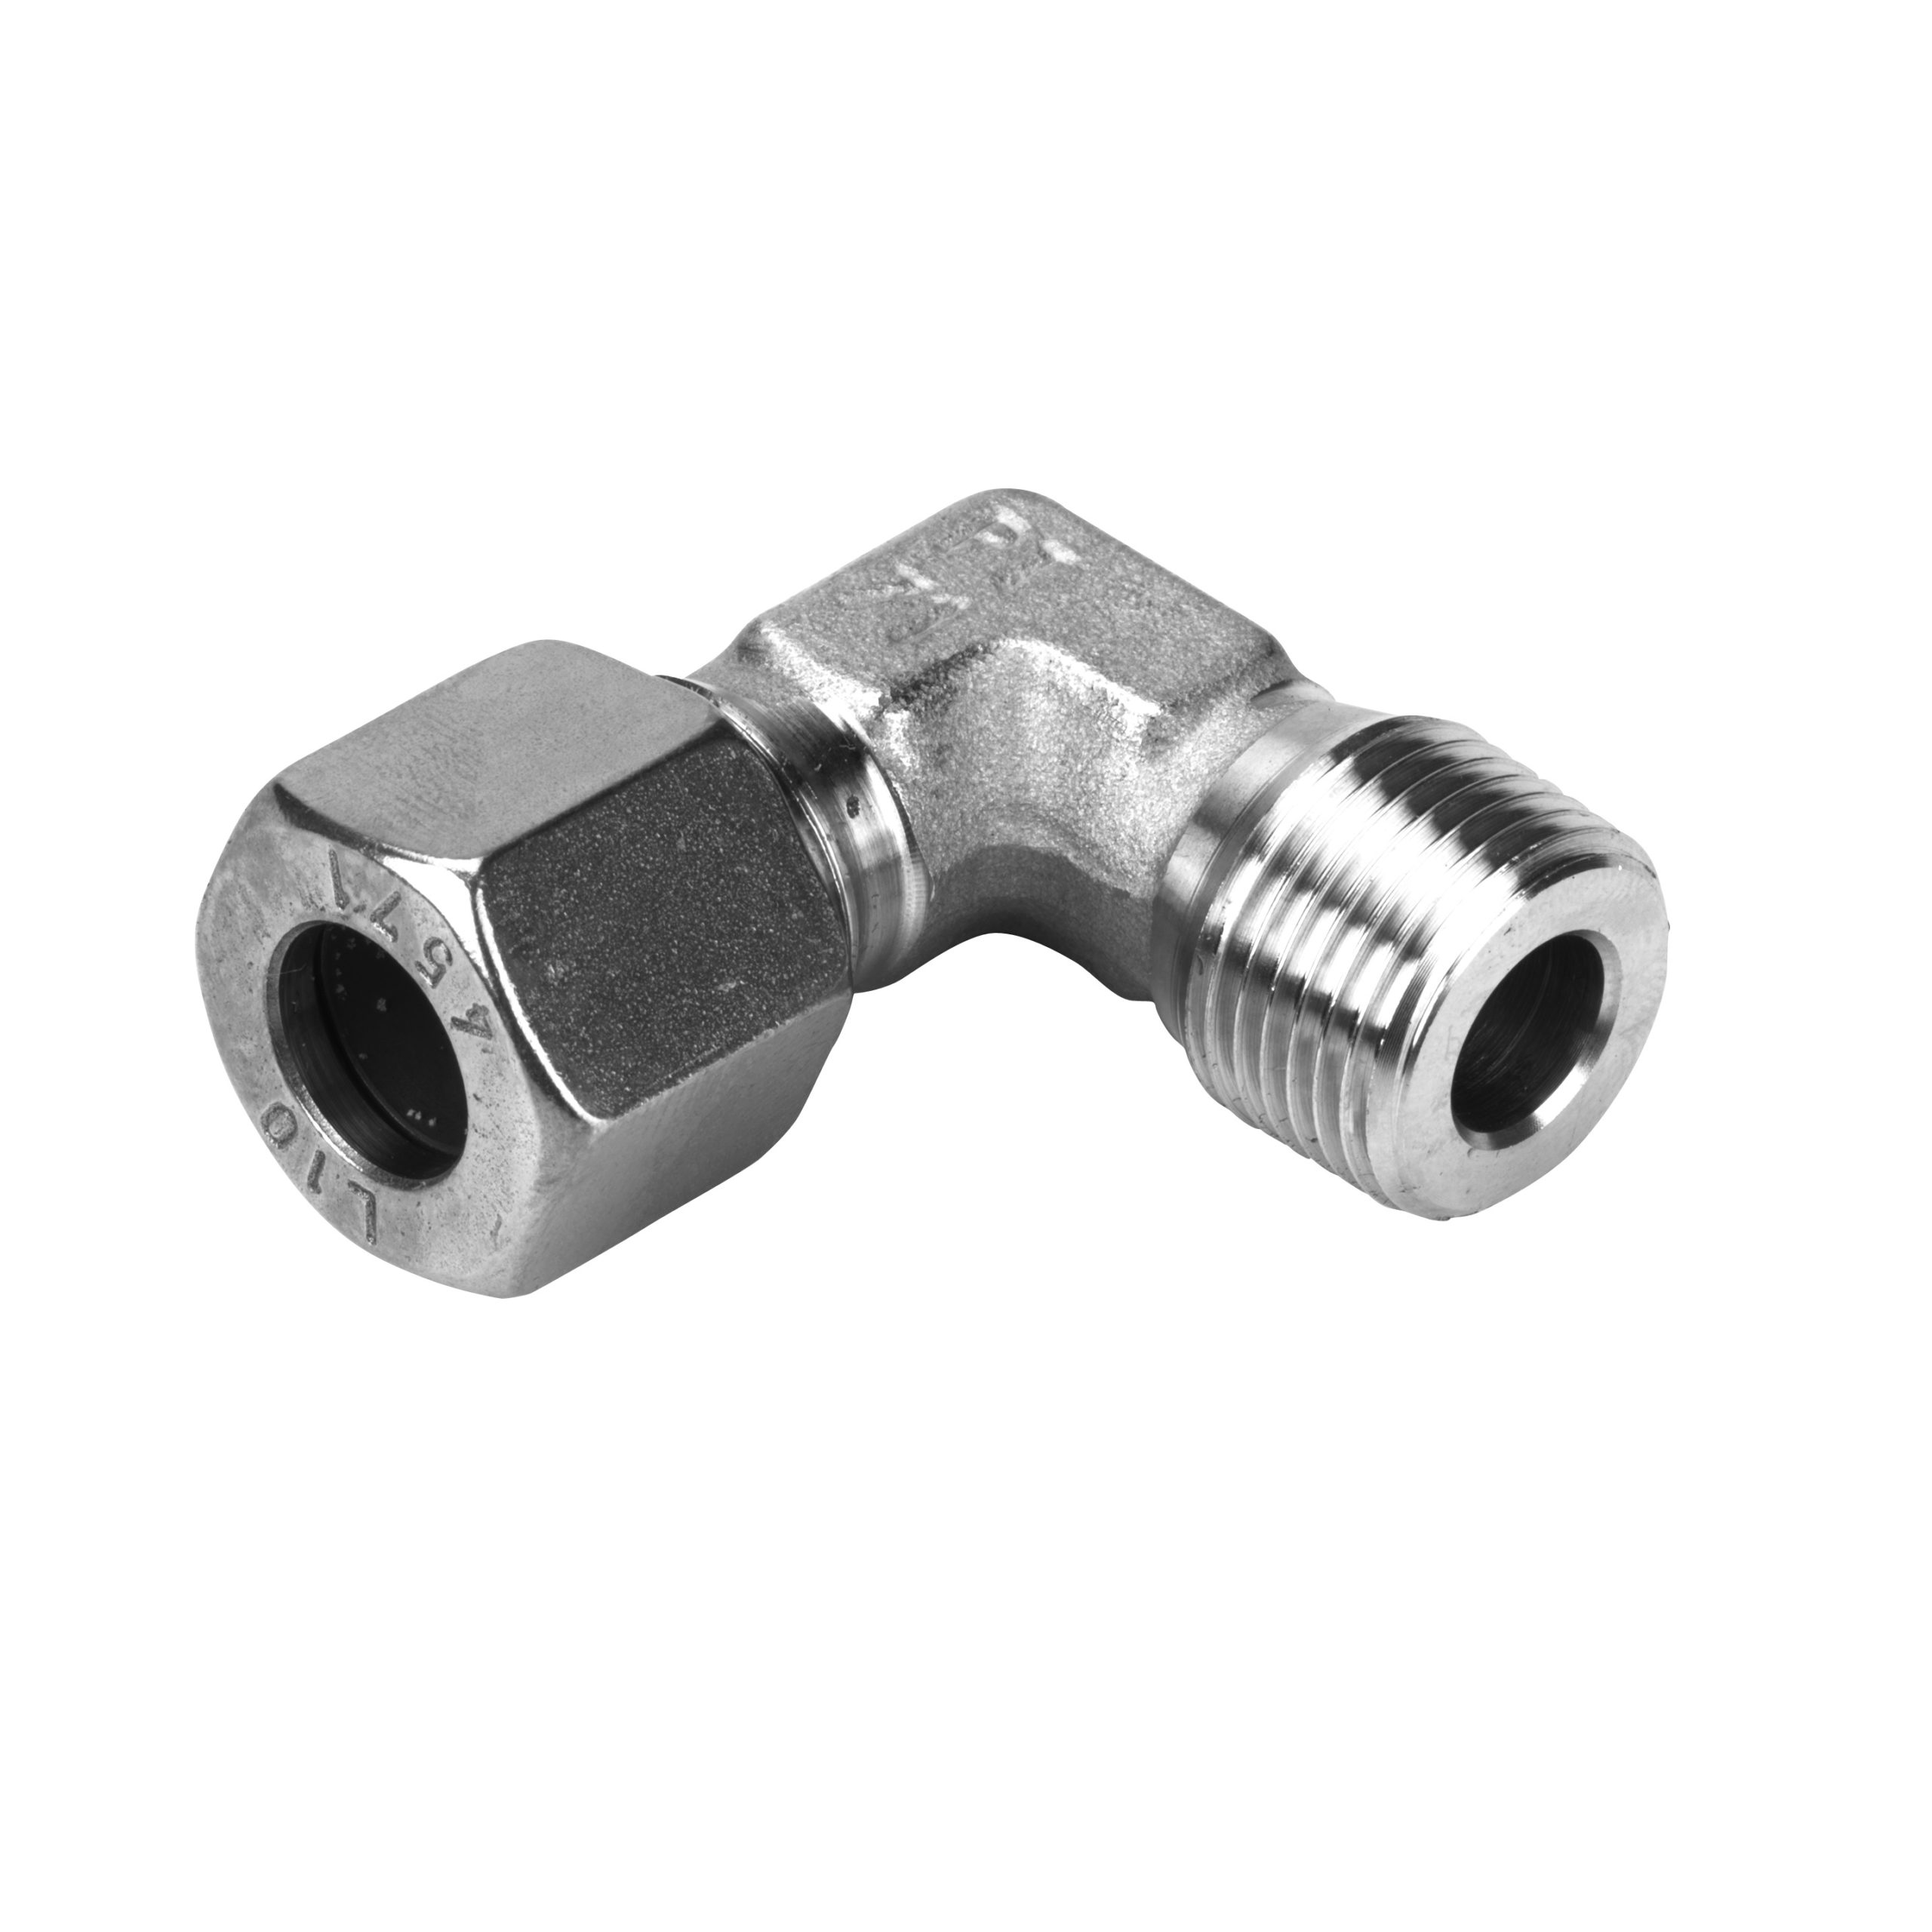 Male Compression Fitting - 90 Degree Elbow